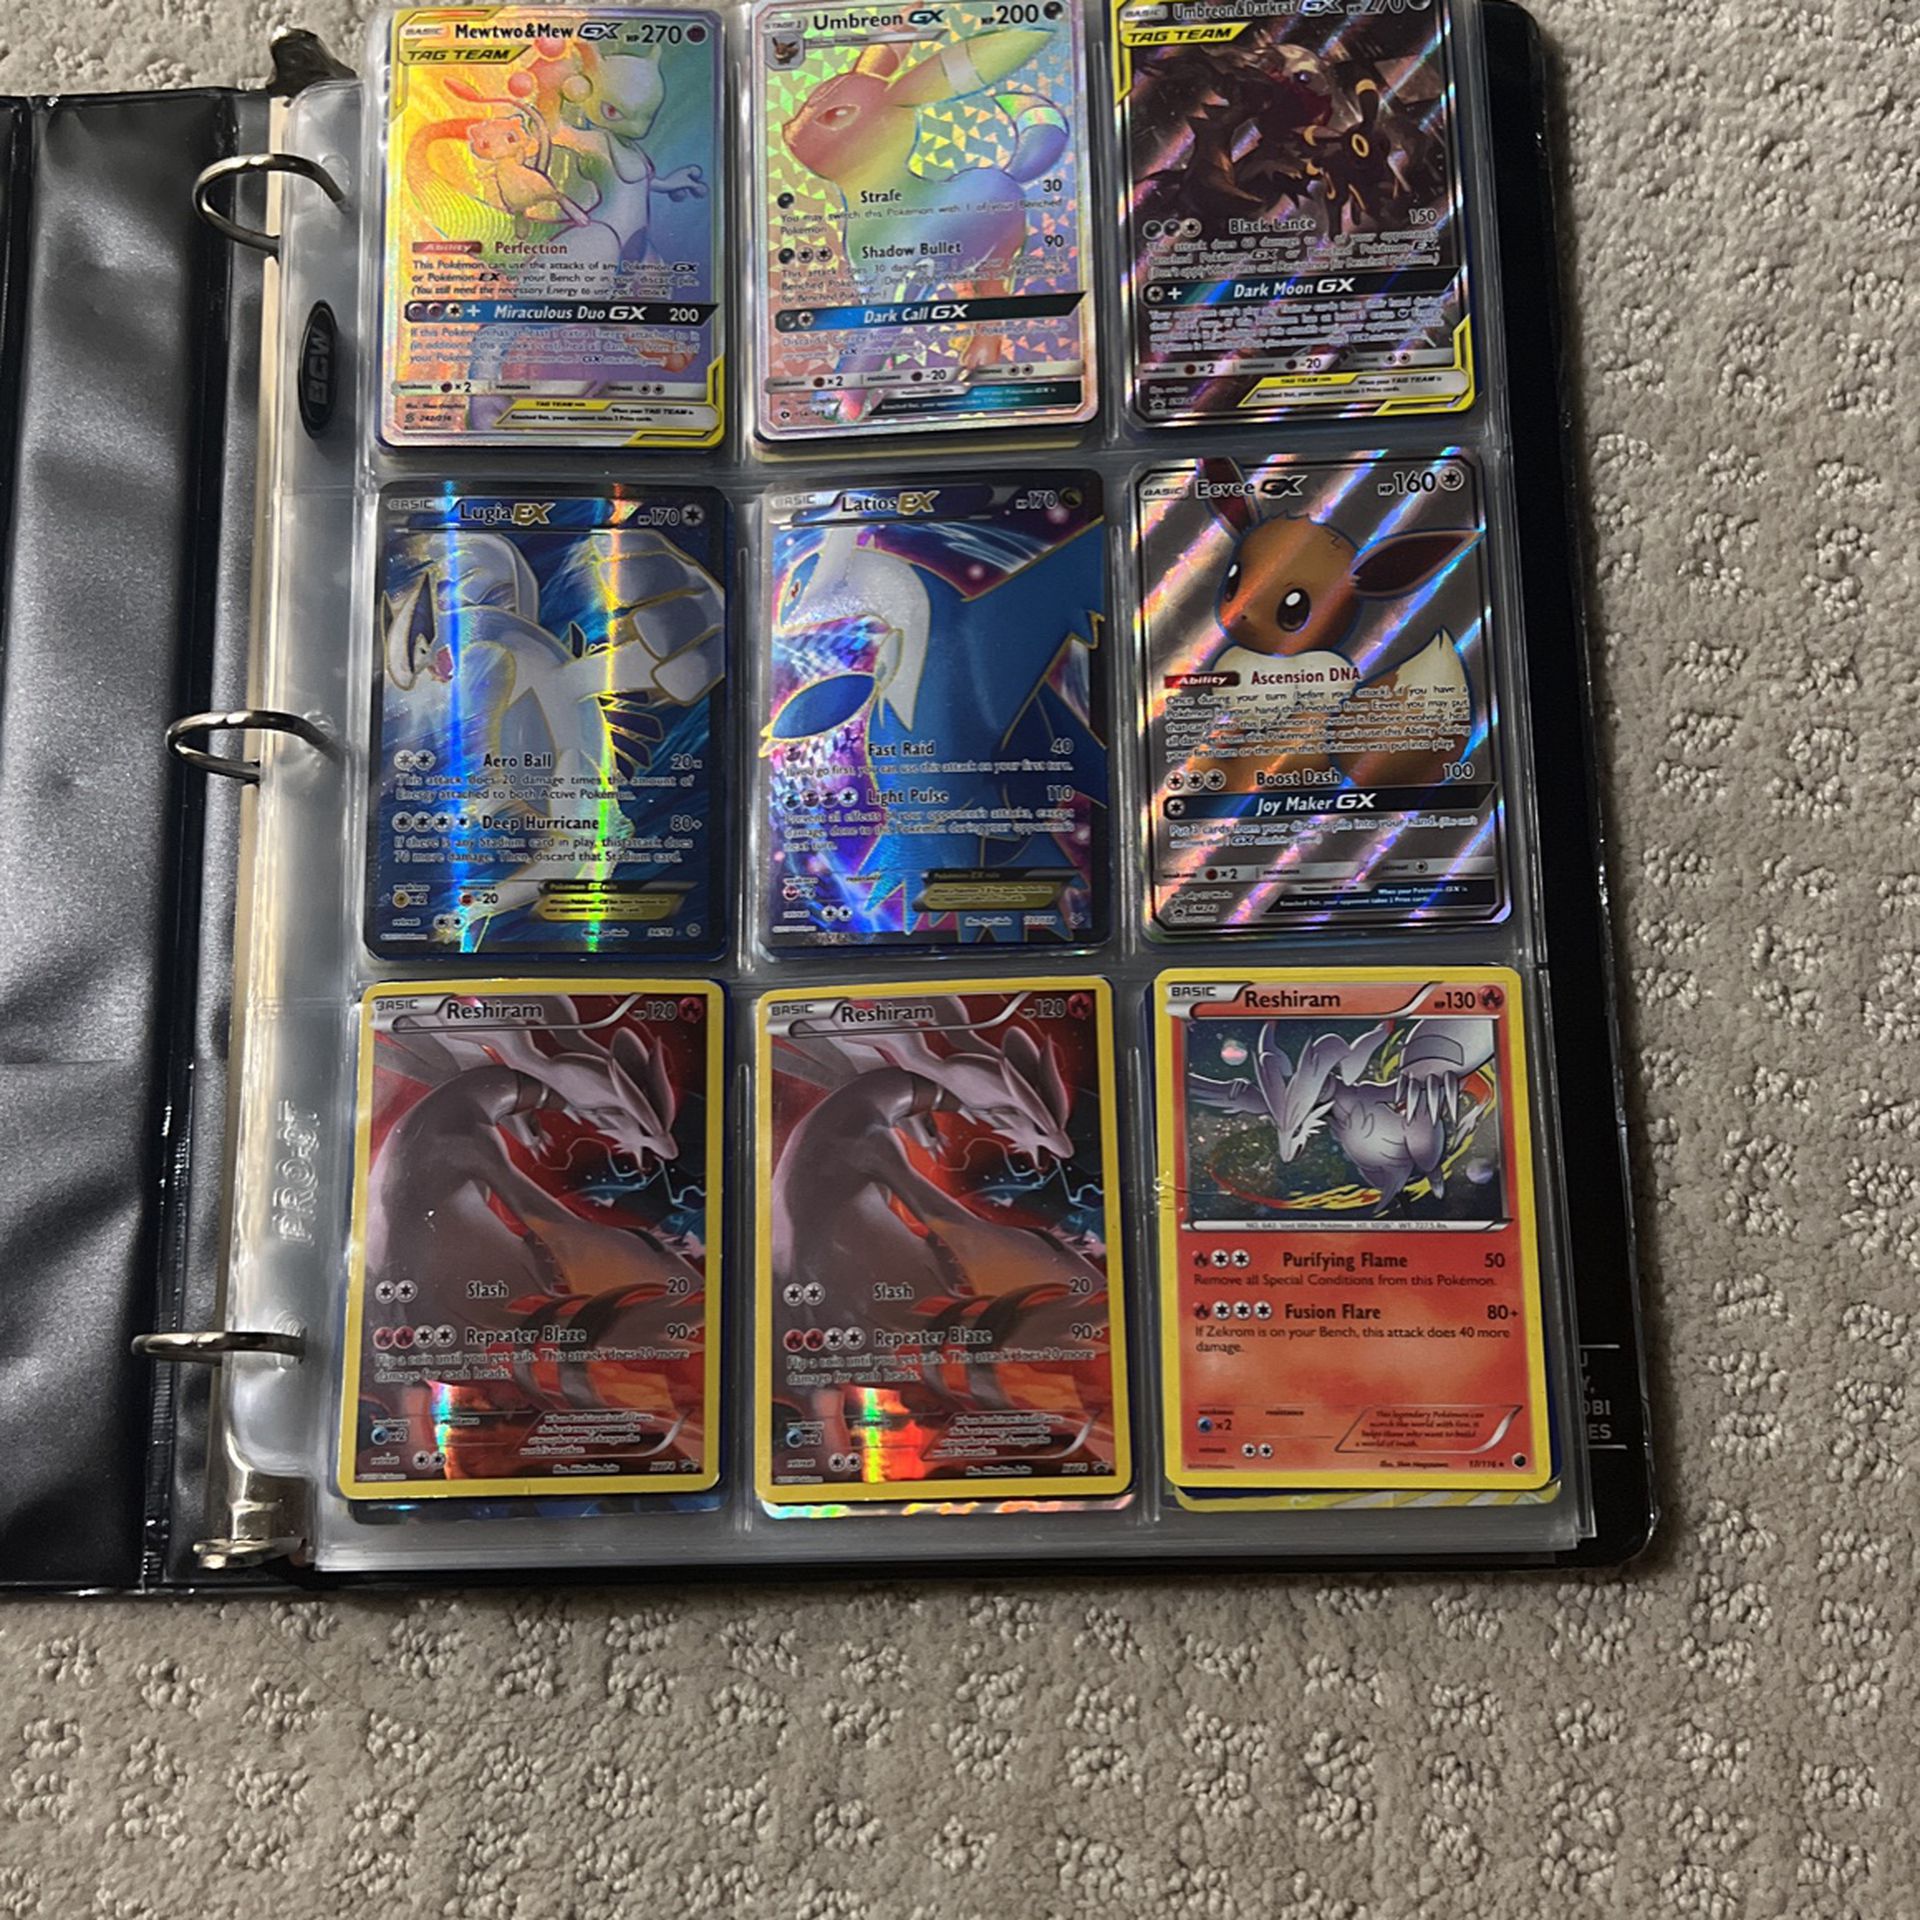 Pokémon Cards Old And New